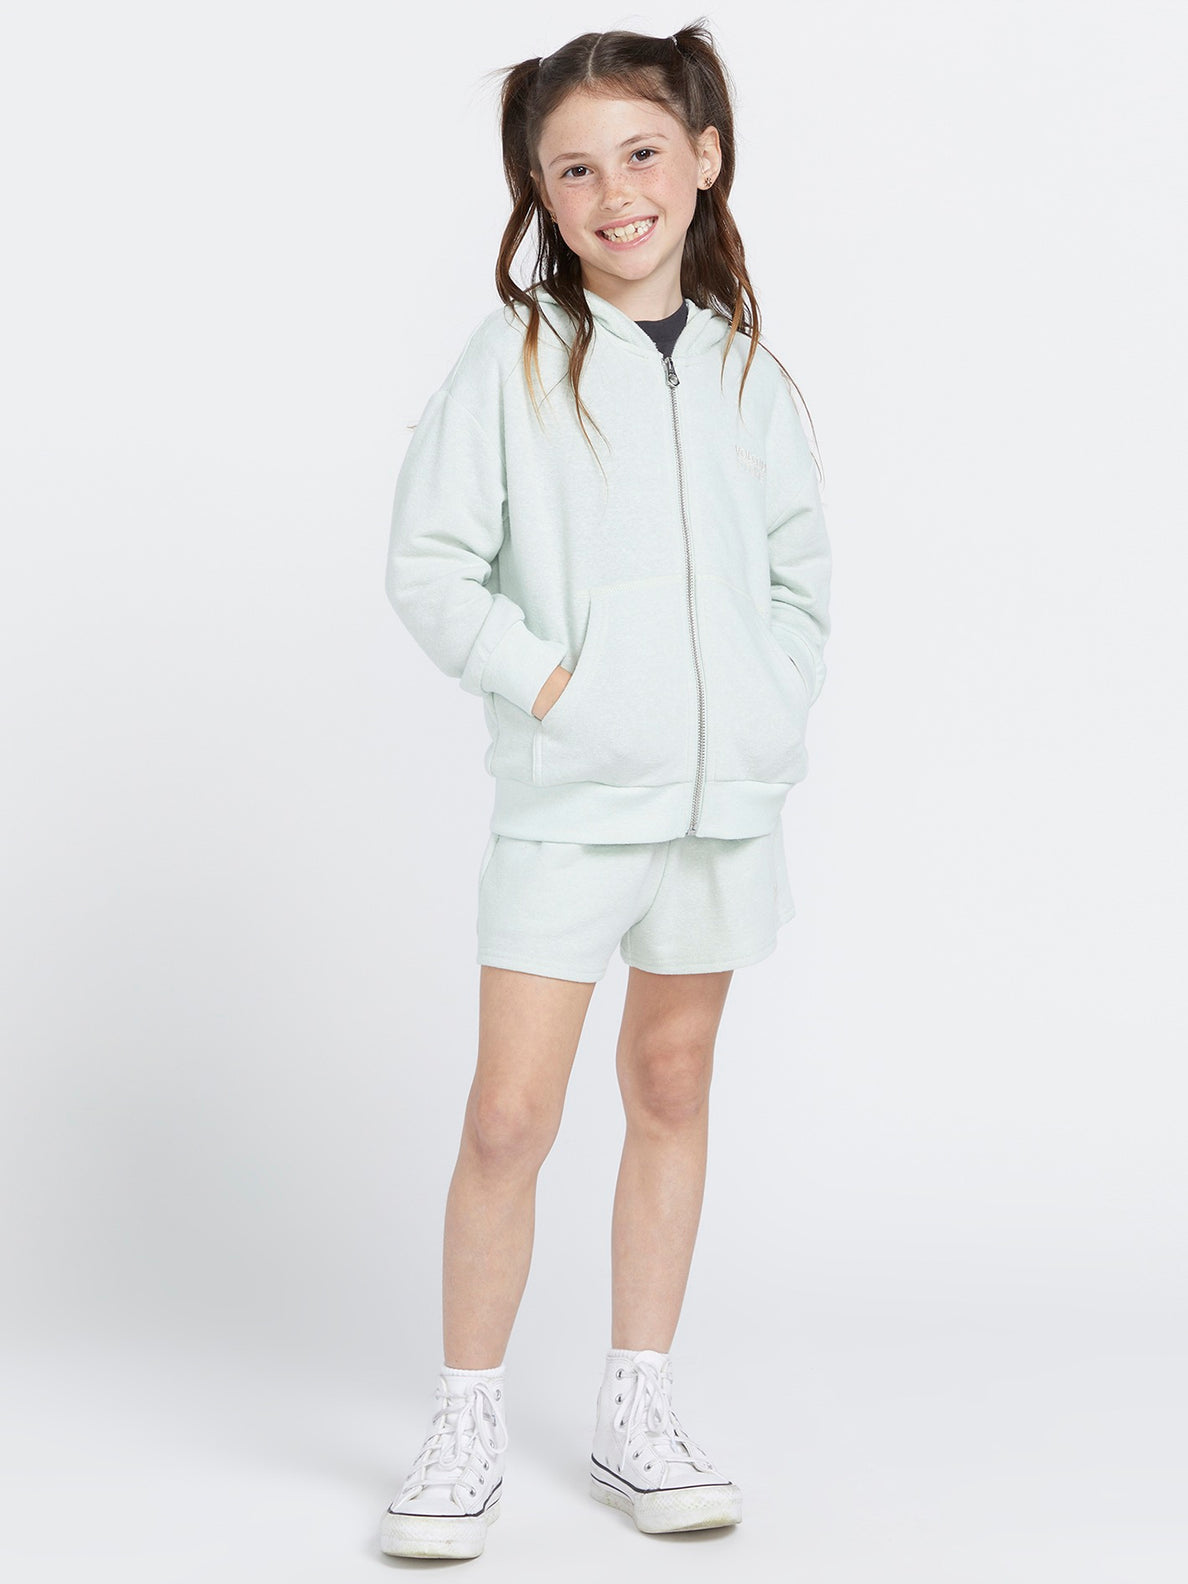 Girls Lived in Lounge Frenchie Zip Jacket - Chlorine